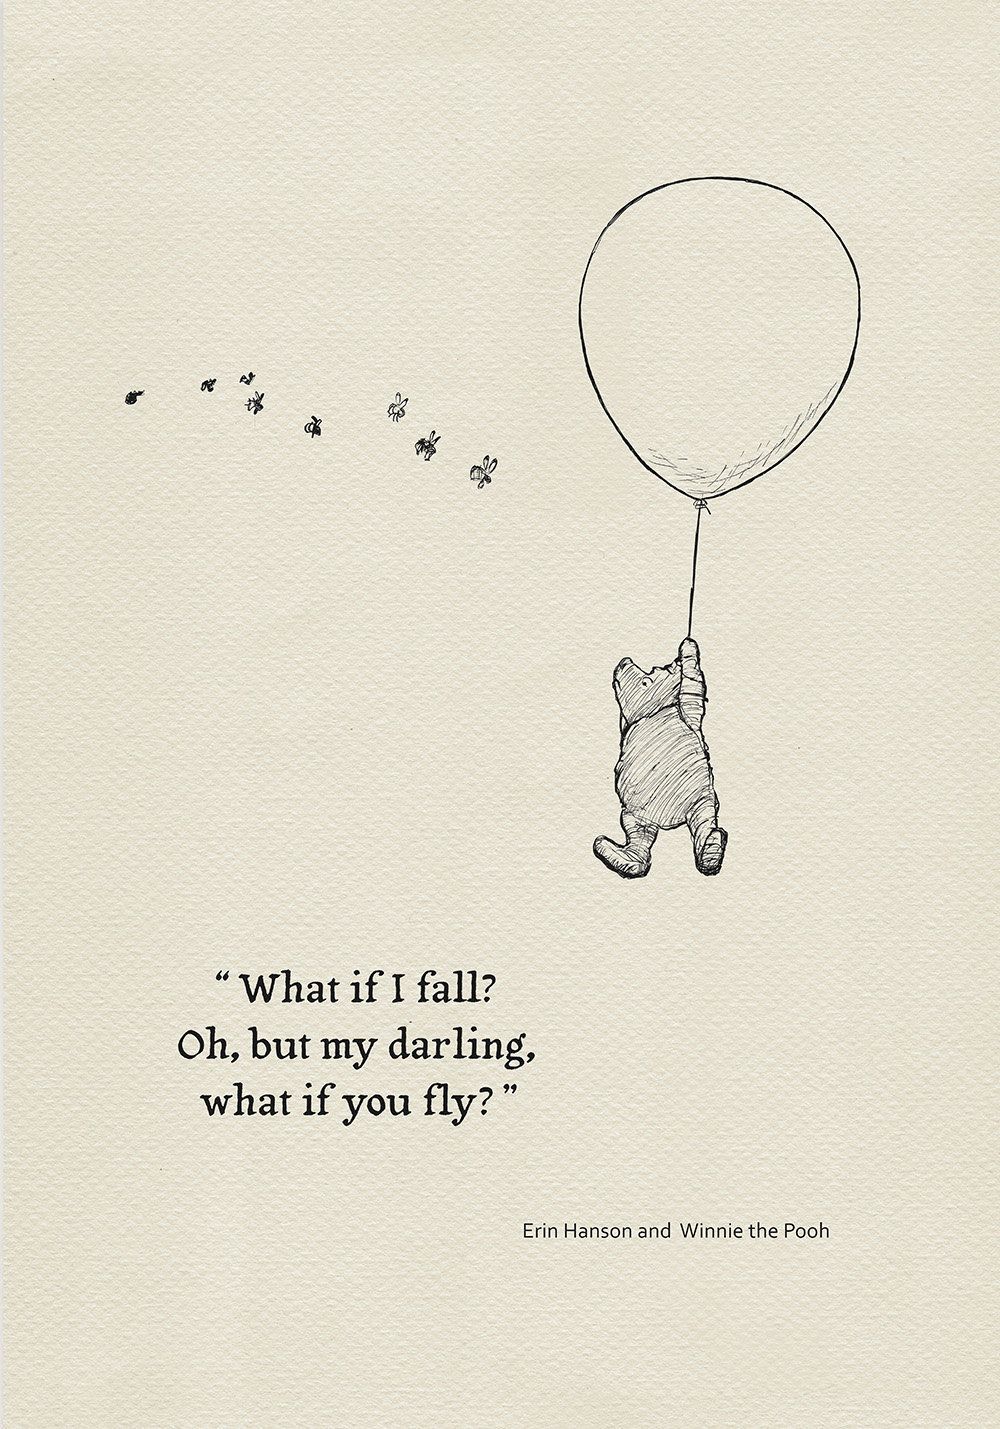 What if I fall? Oh,but my darling,what if you fly?- Quote poster Winnie the Pooh and Erin Hanson classic vintage style poster print #105 - What if I fall? Oh,but my darling,what if you fly?- Quote poster Winnie the Pooh and Erin Hanson classic vintage style poster print #105 -   12 vintage style Quotes ideas